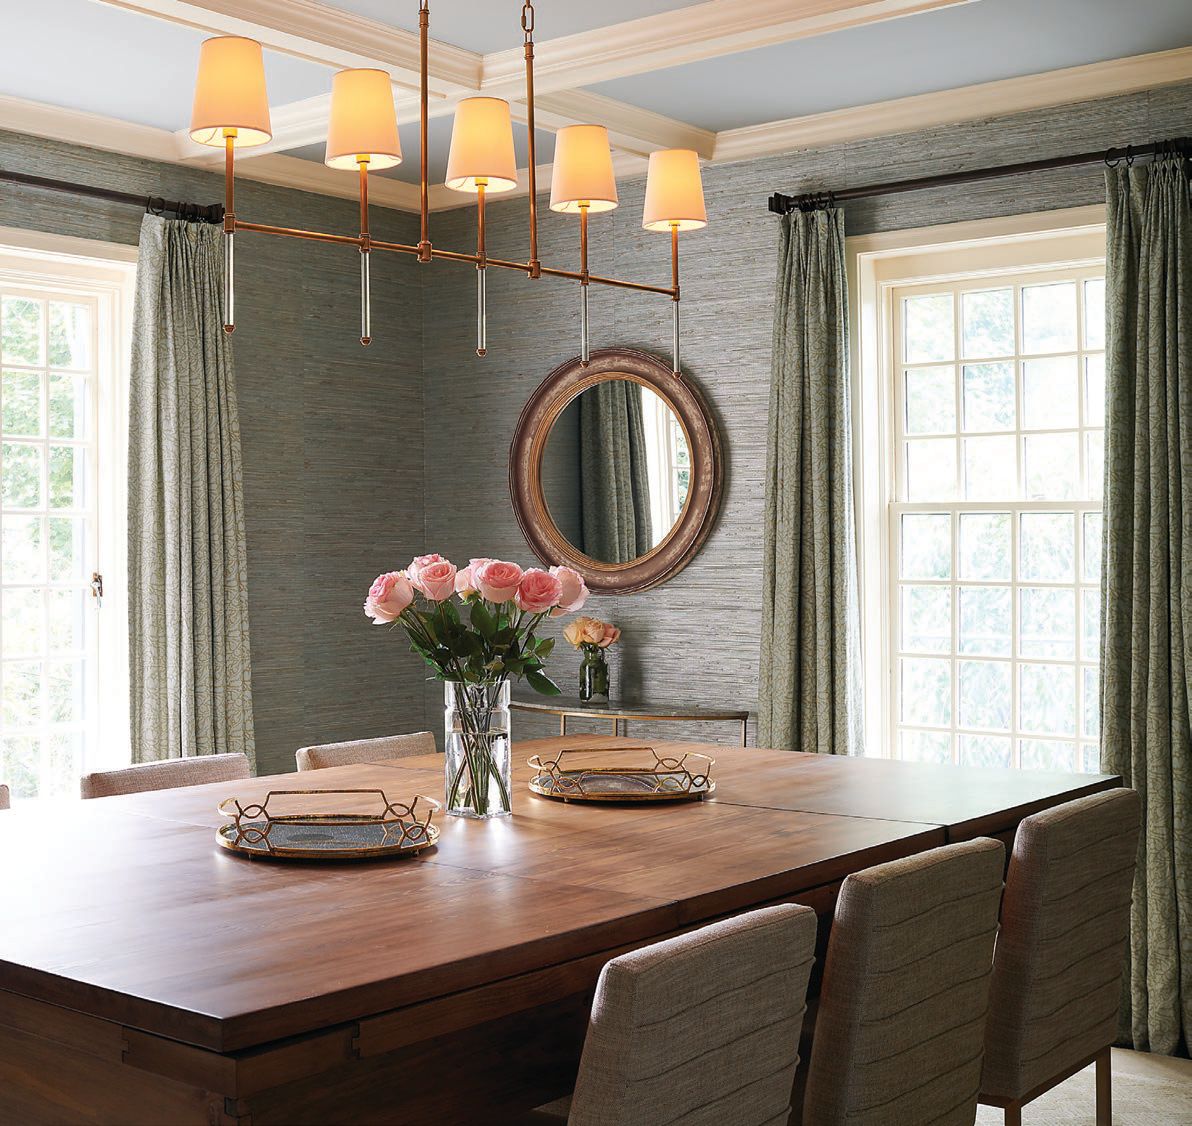 A Circa Lighting chandelier in the dining room Photographed by Rebecca McAlpin